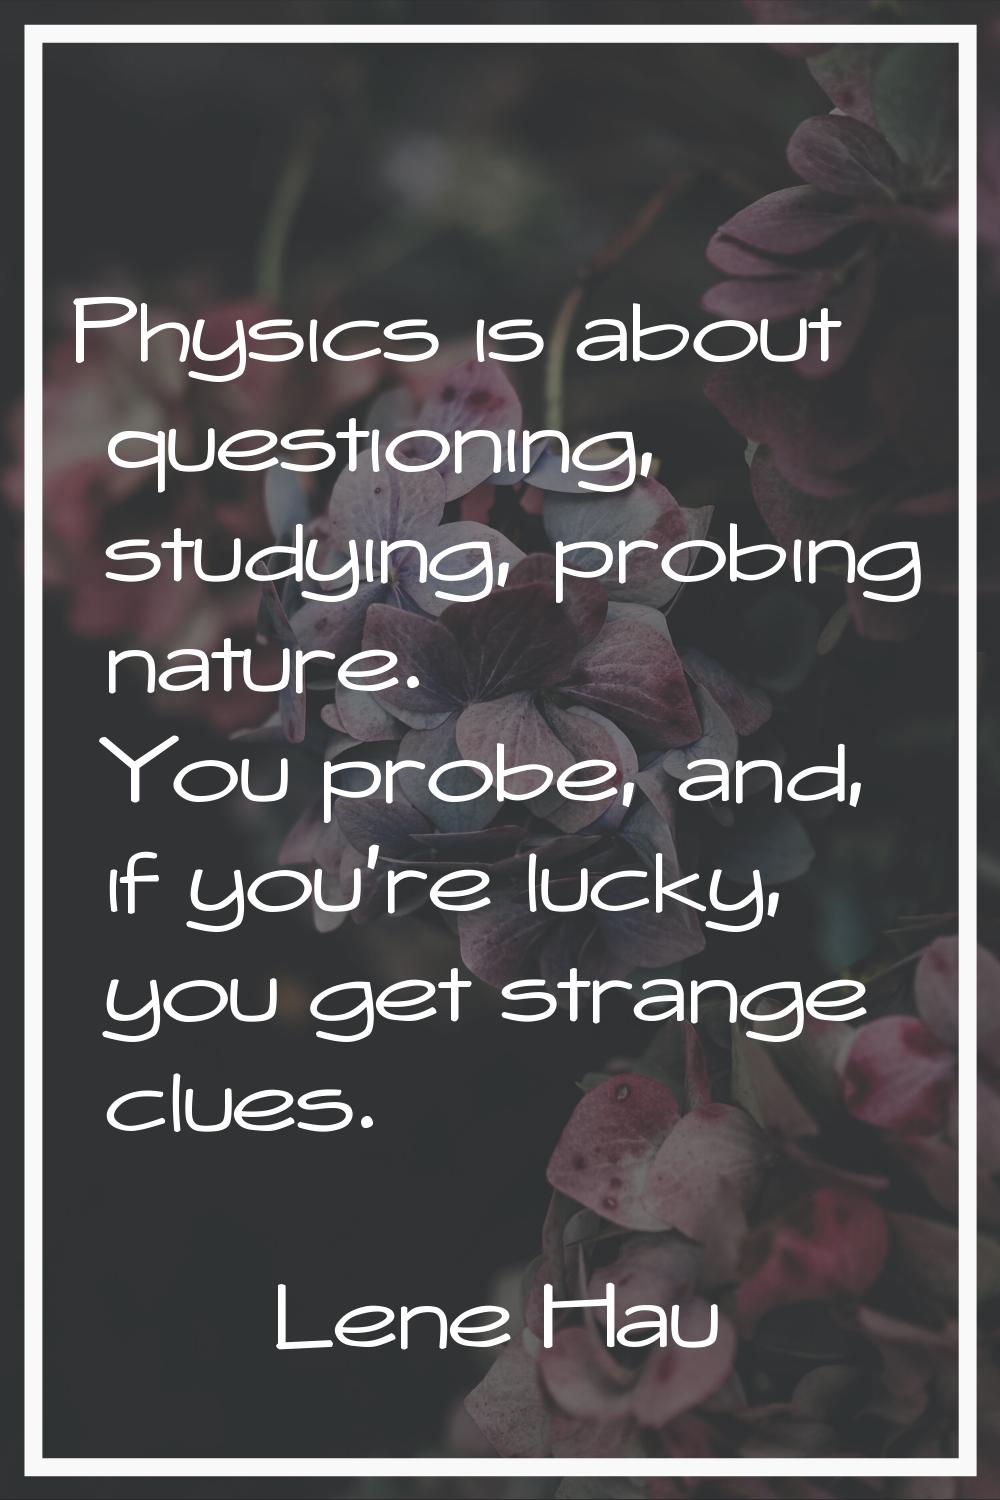 Physics is about questioning, studying, probing nature. You probe, and, if you're lucky, you get st